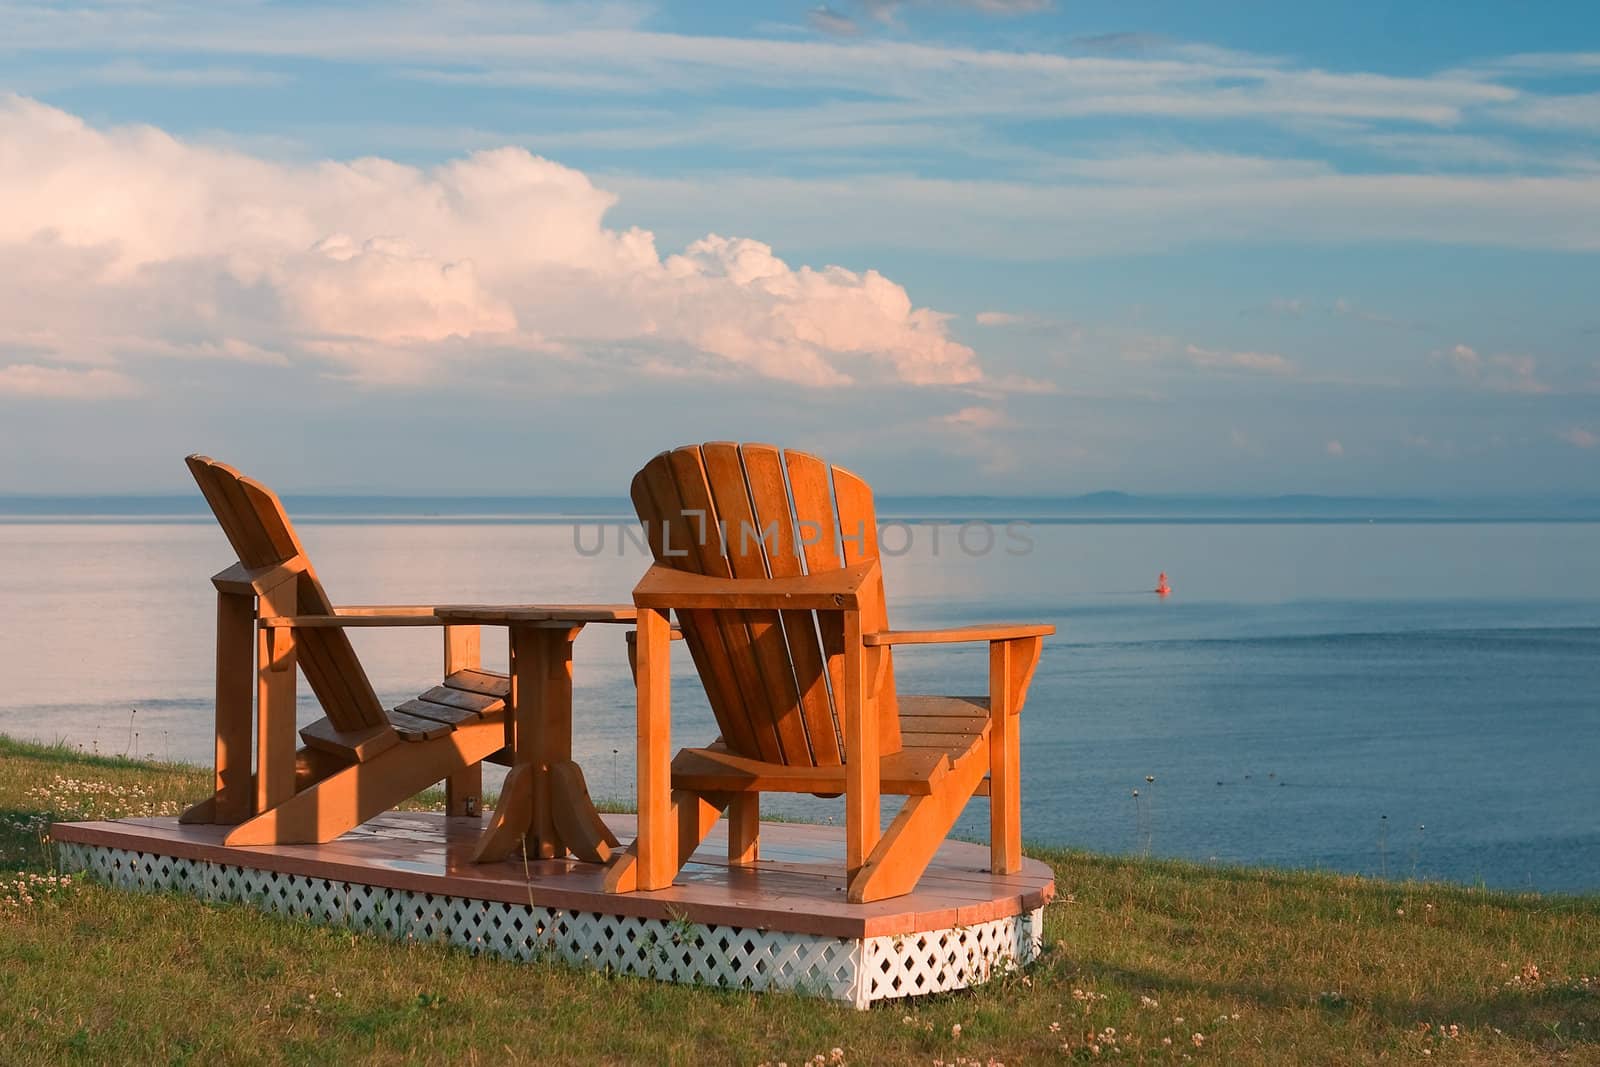 Two Lonely Chairs on the beach in Canada